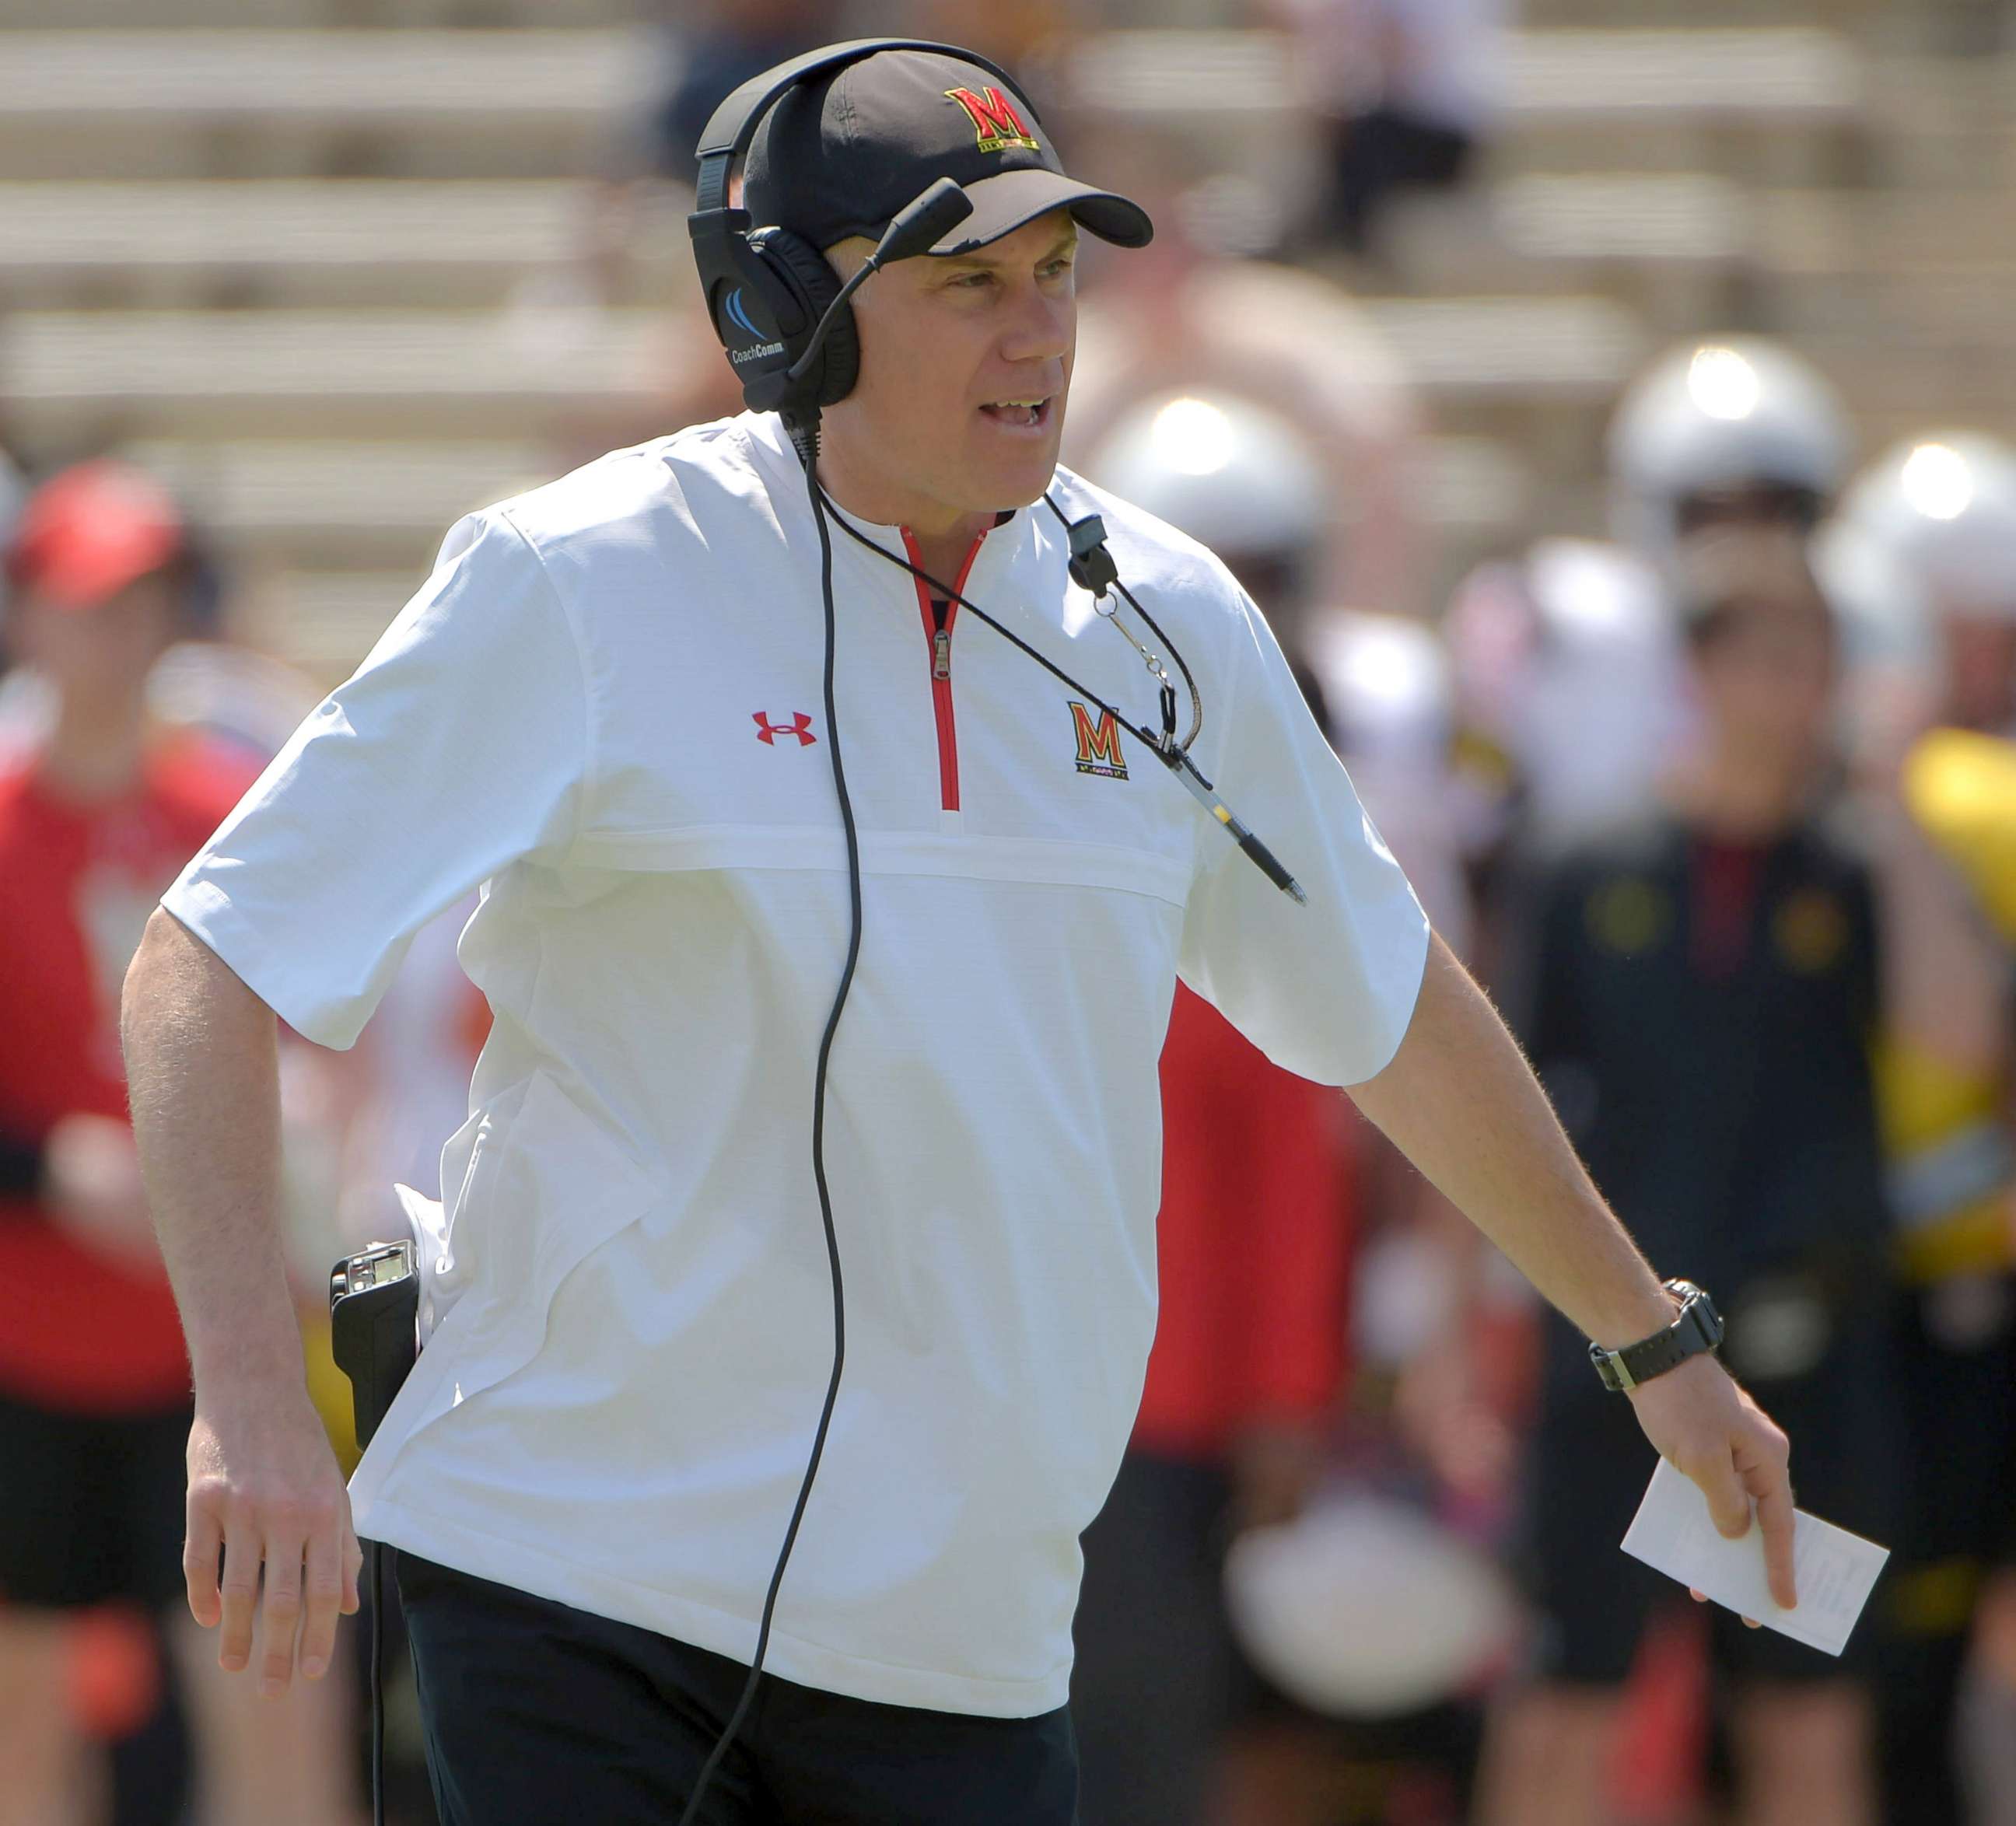 PHOTO: Maryland head coach D.J. Durkin during the Terrapins' Spring Football Red/White game in College Park, Md., April 14, 2018.